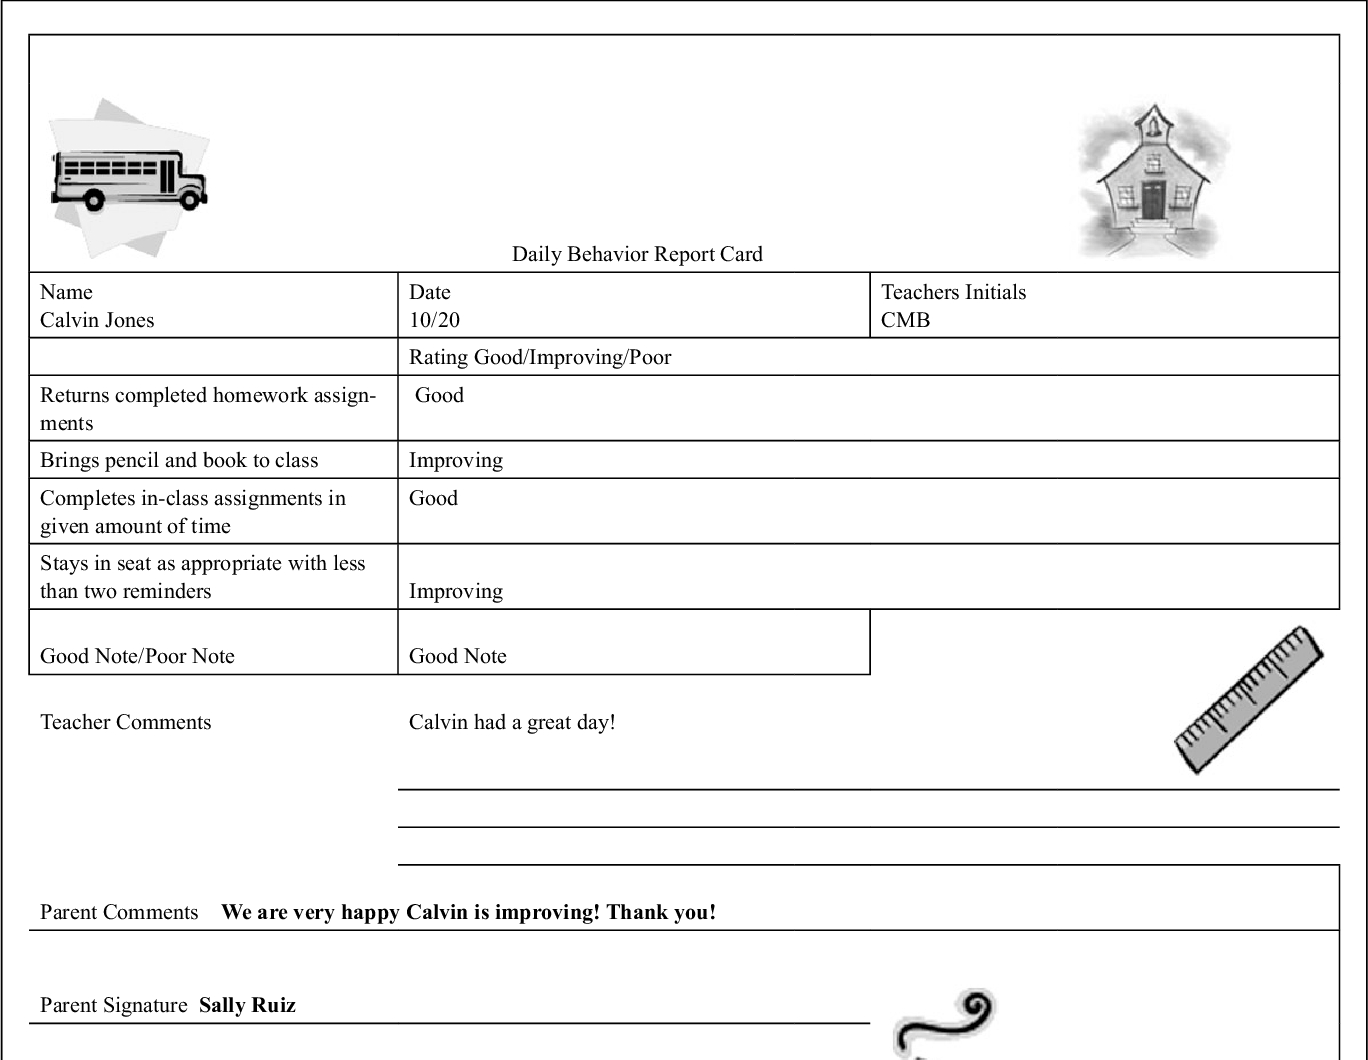 Pdf] Calvin Won't Sit Down! The Daily Behavior Report Card In Daily Report Card Template For Adhd